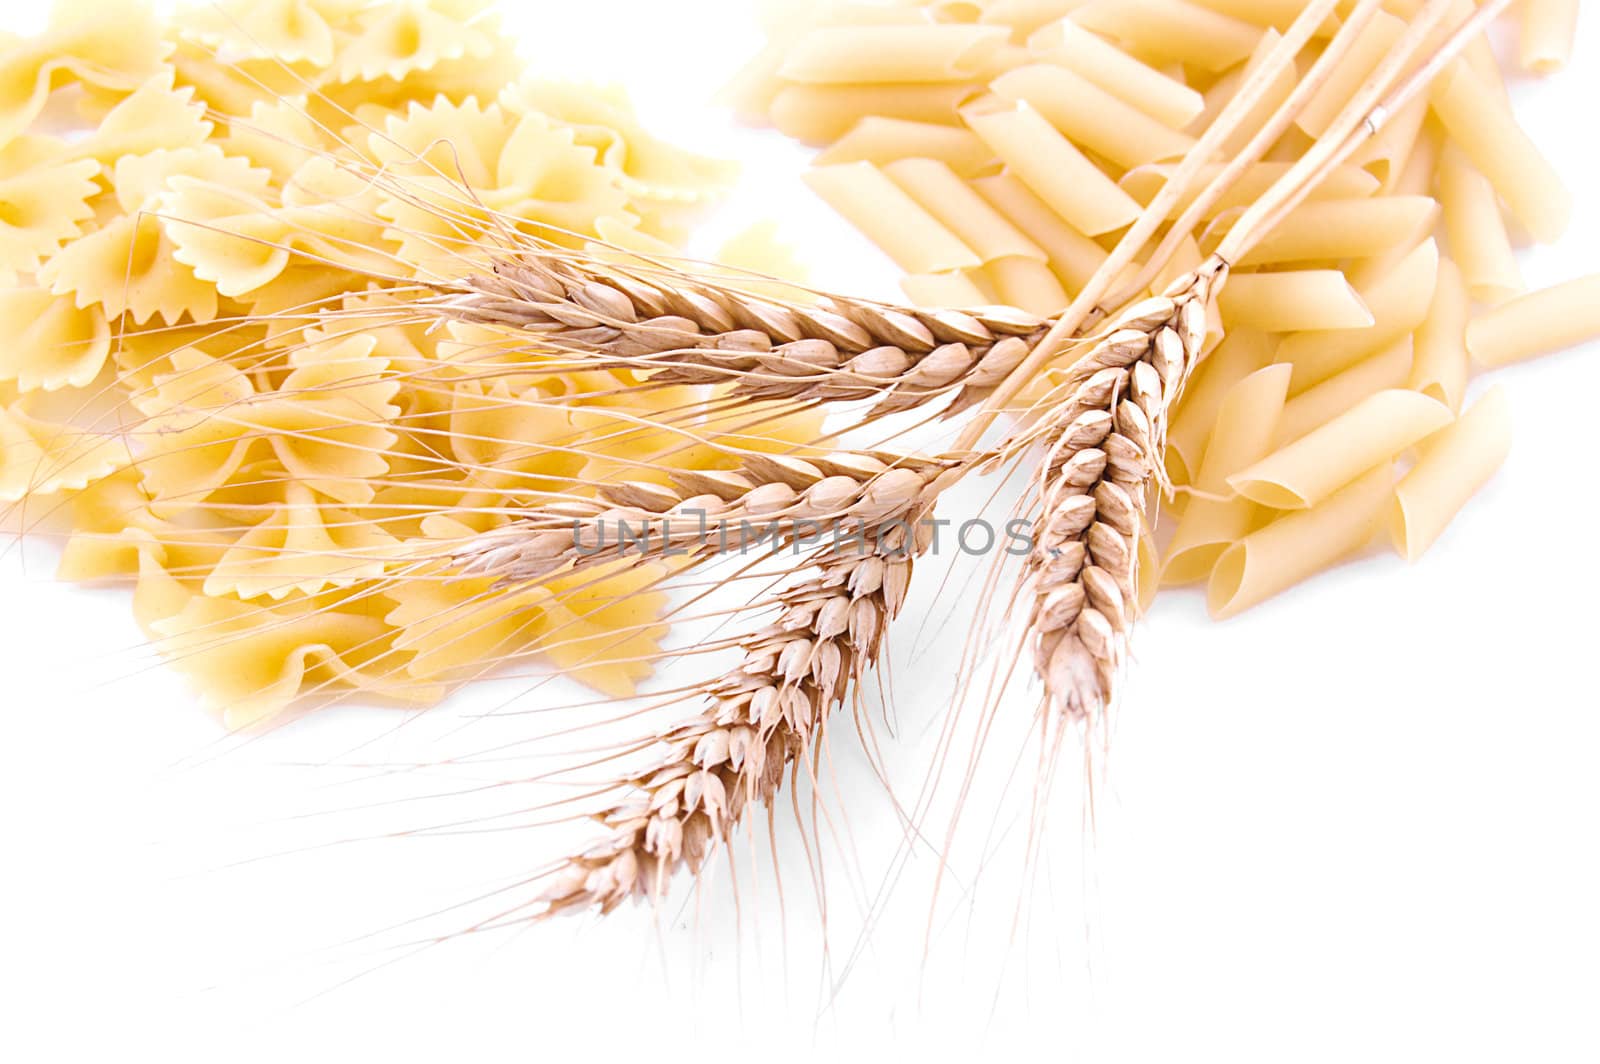 Pasta with wheat ears on white